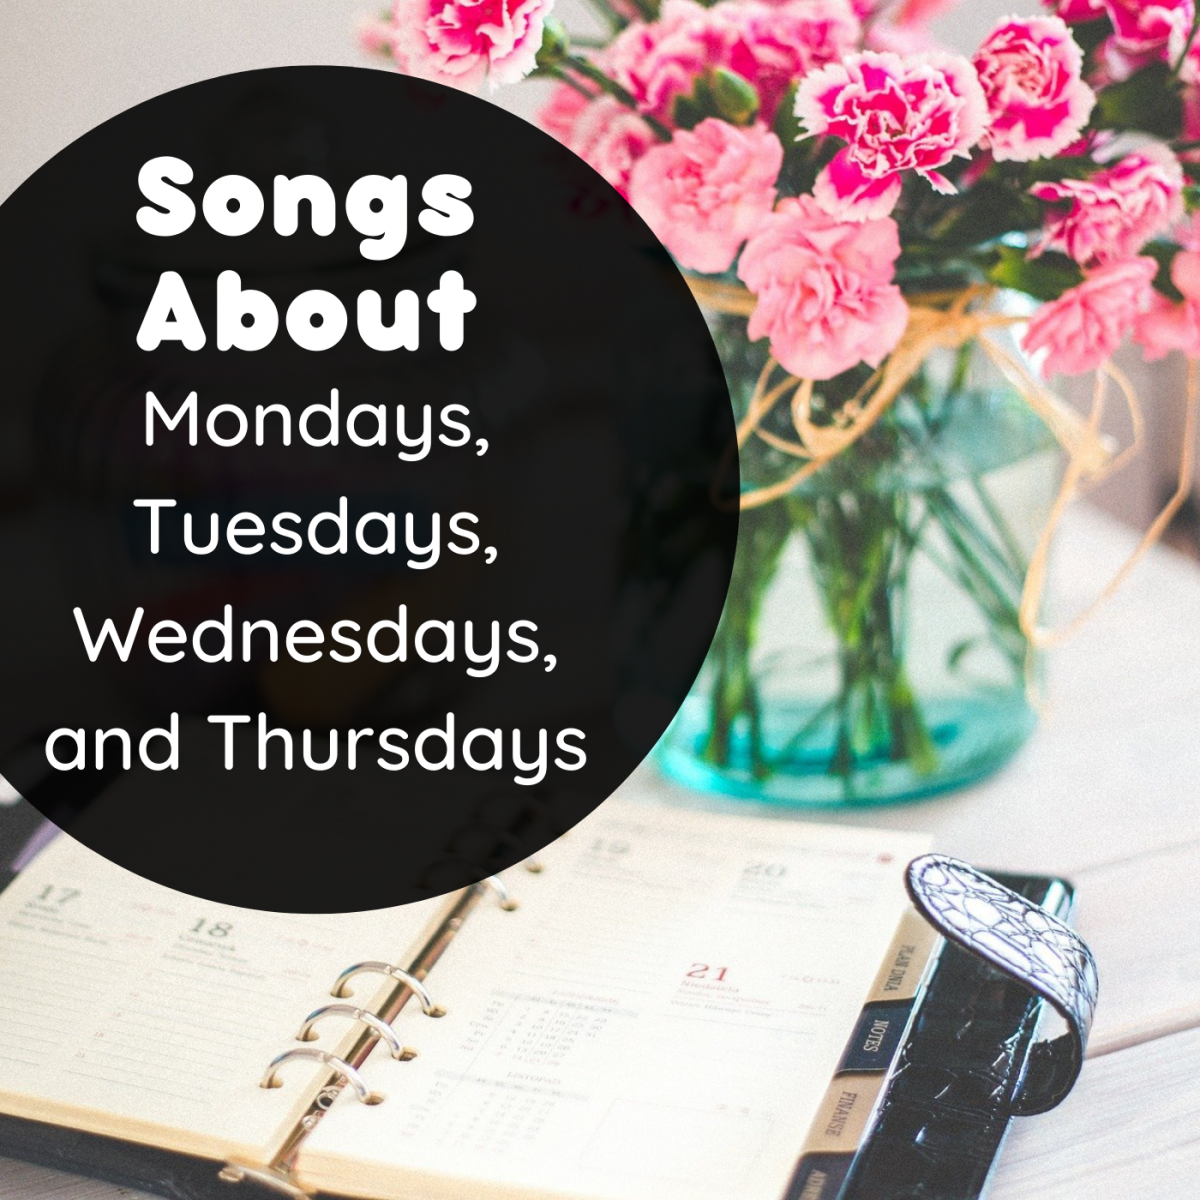 Celebrate the weekdays of Manic Monday, Taco Tuesday, Wednesday (hump day), and Thursday with a playlist of pop, rock, country, and R&B songs.